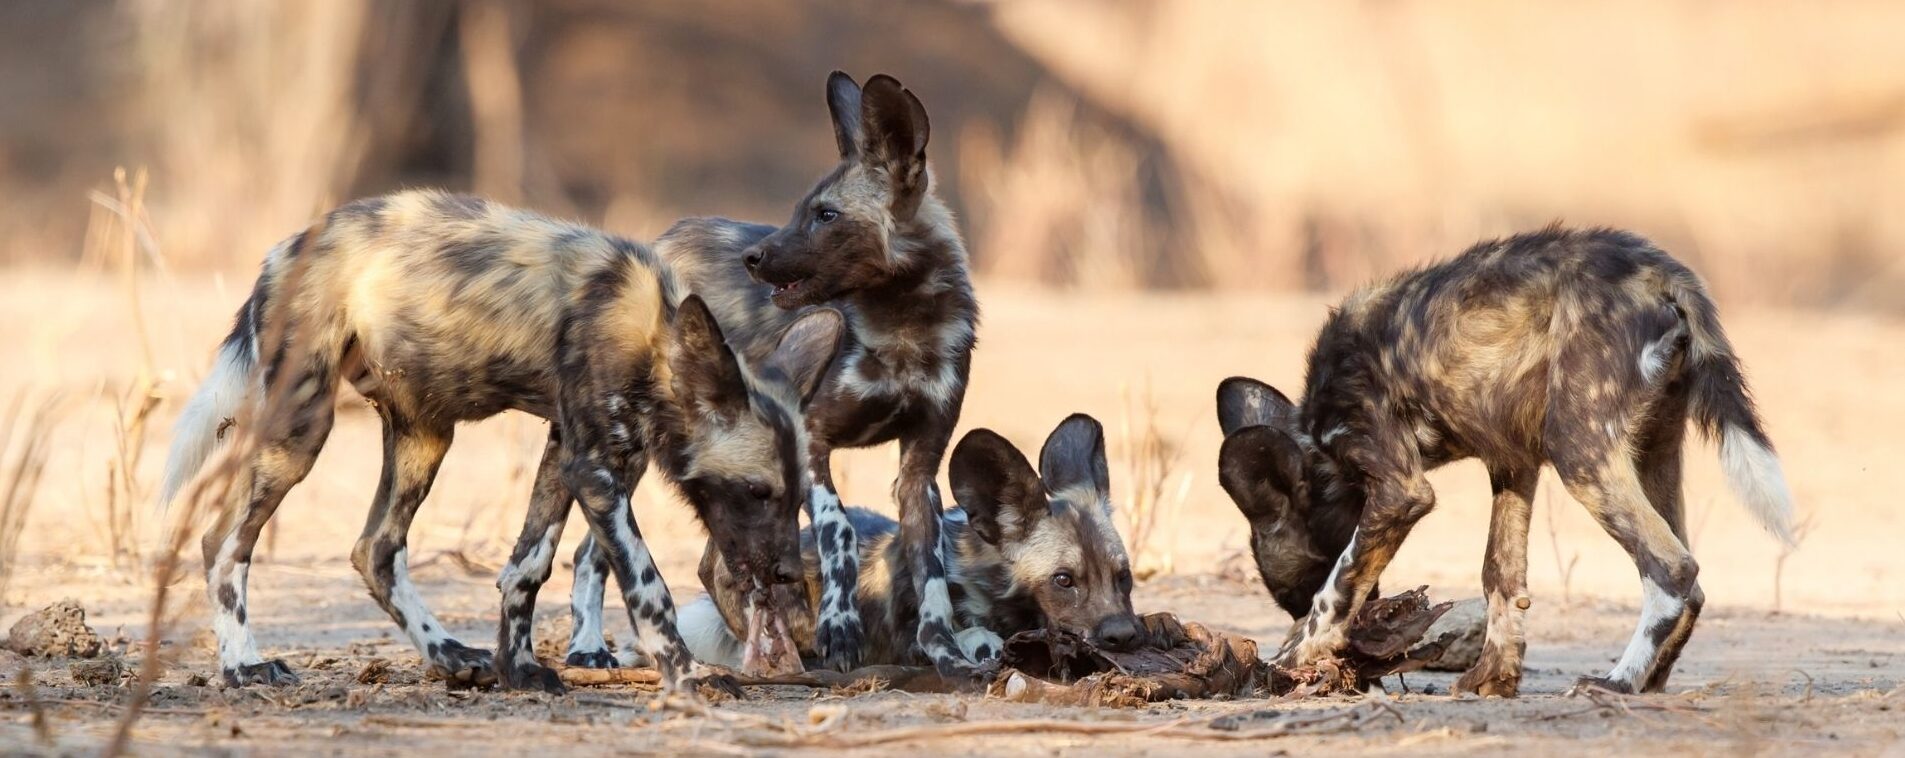 Wild dogs in Mana Pools